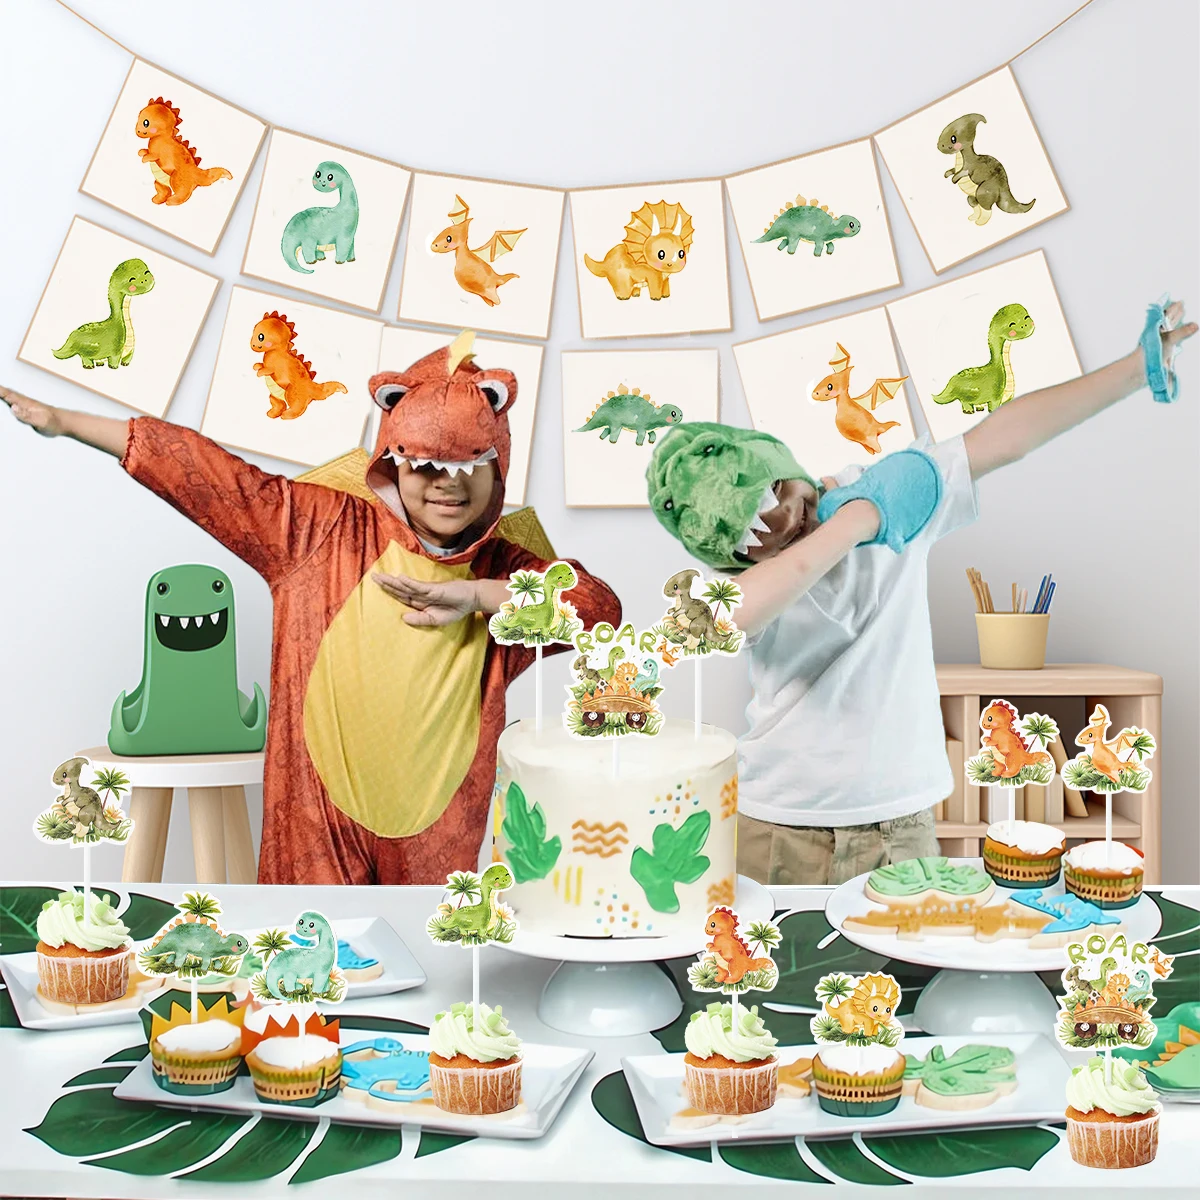 Dinosaur Theme Cake Toppers Dinosaur Party Happy Birthday Party Decor Gift for Kids Baby Shower Boy Dinosaur Cake Accessories images - 6